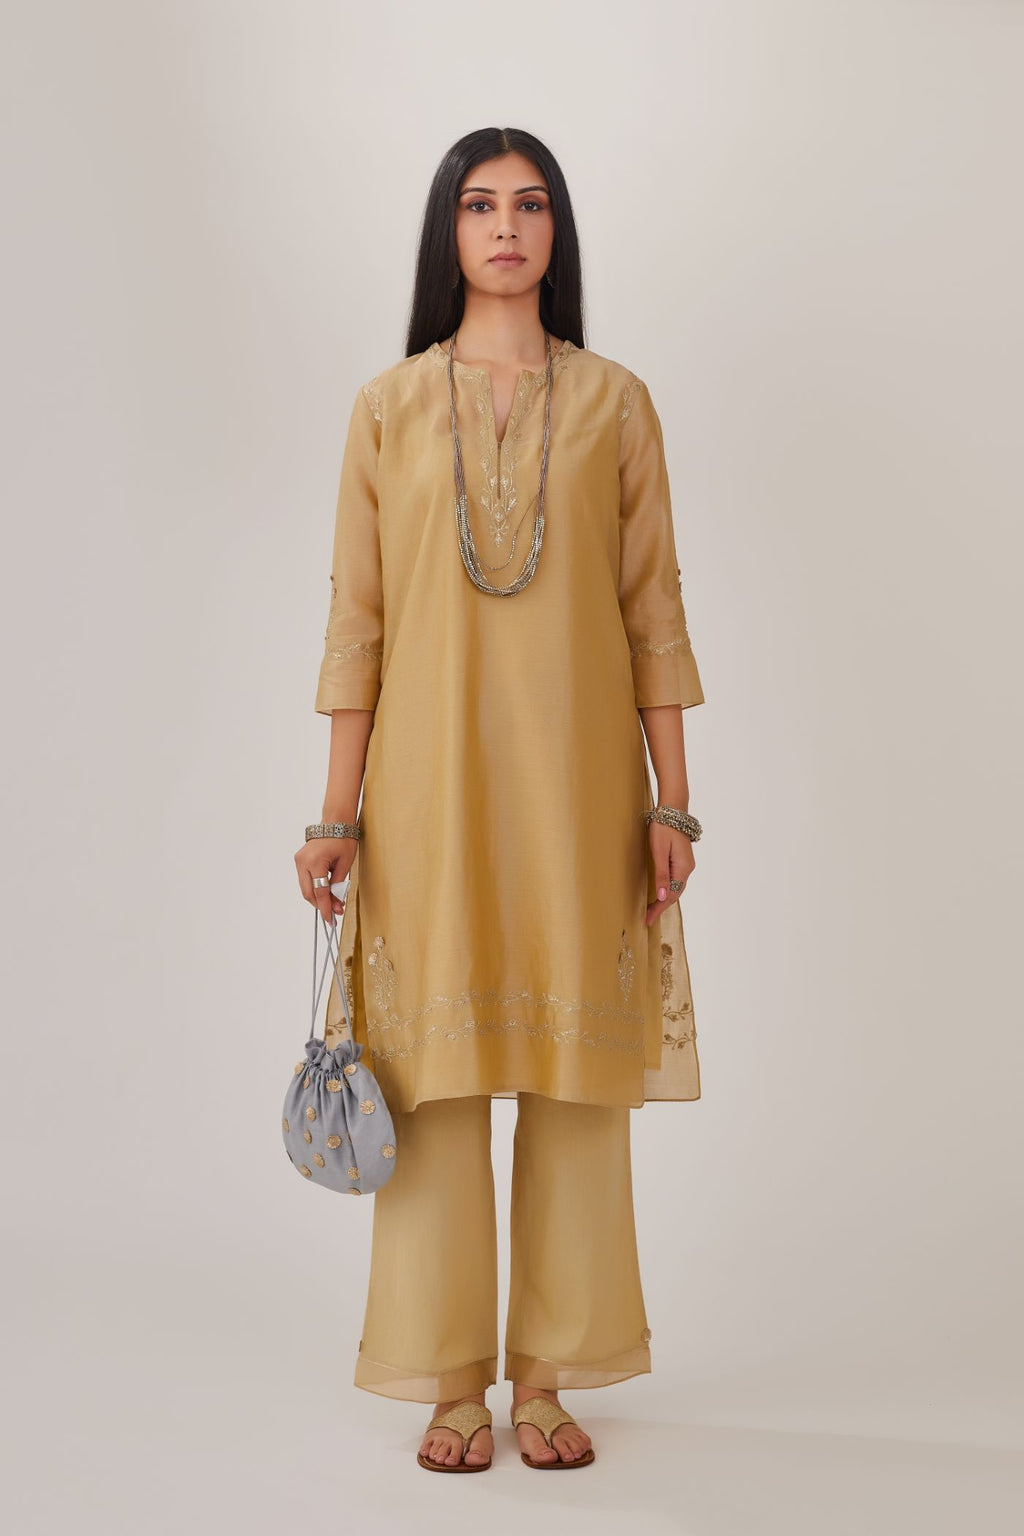 Olive silk chanderi short kurta detailed with gota embroidery and highlighted with bugle beads and sequins, paired with olive straight pants with gota and silk chanderi fabric detaling at bottom hem